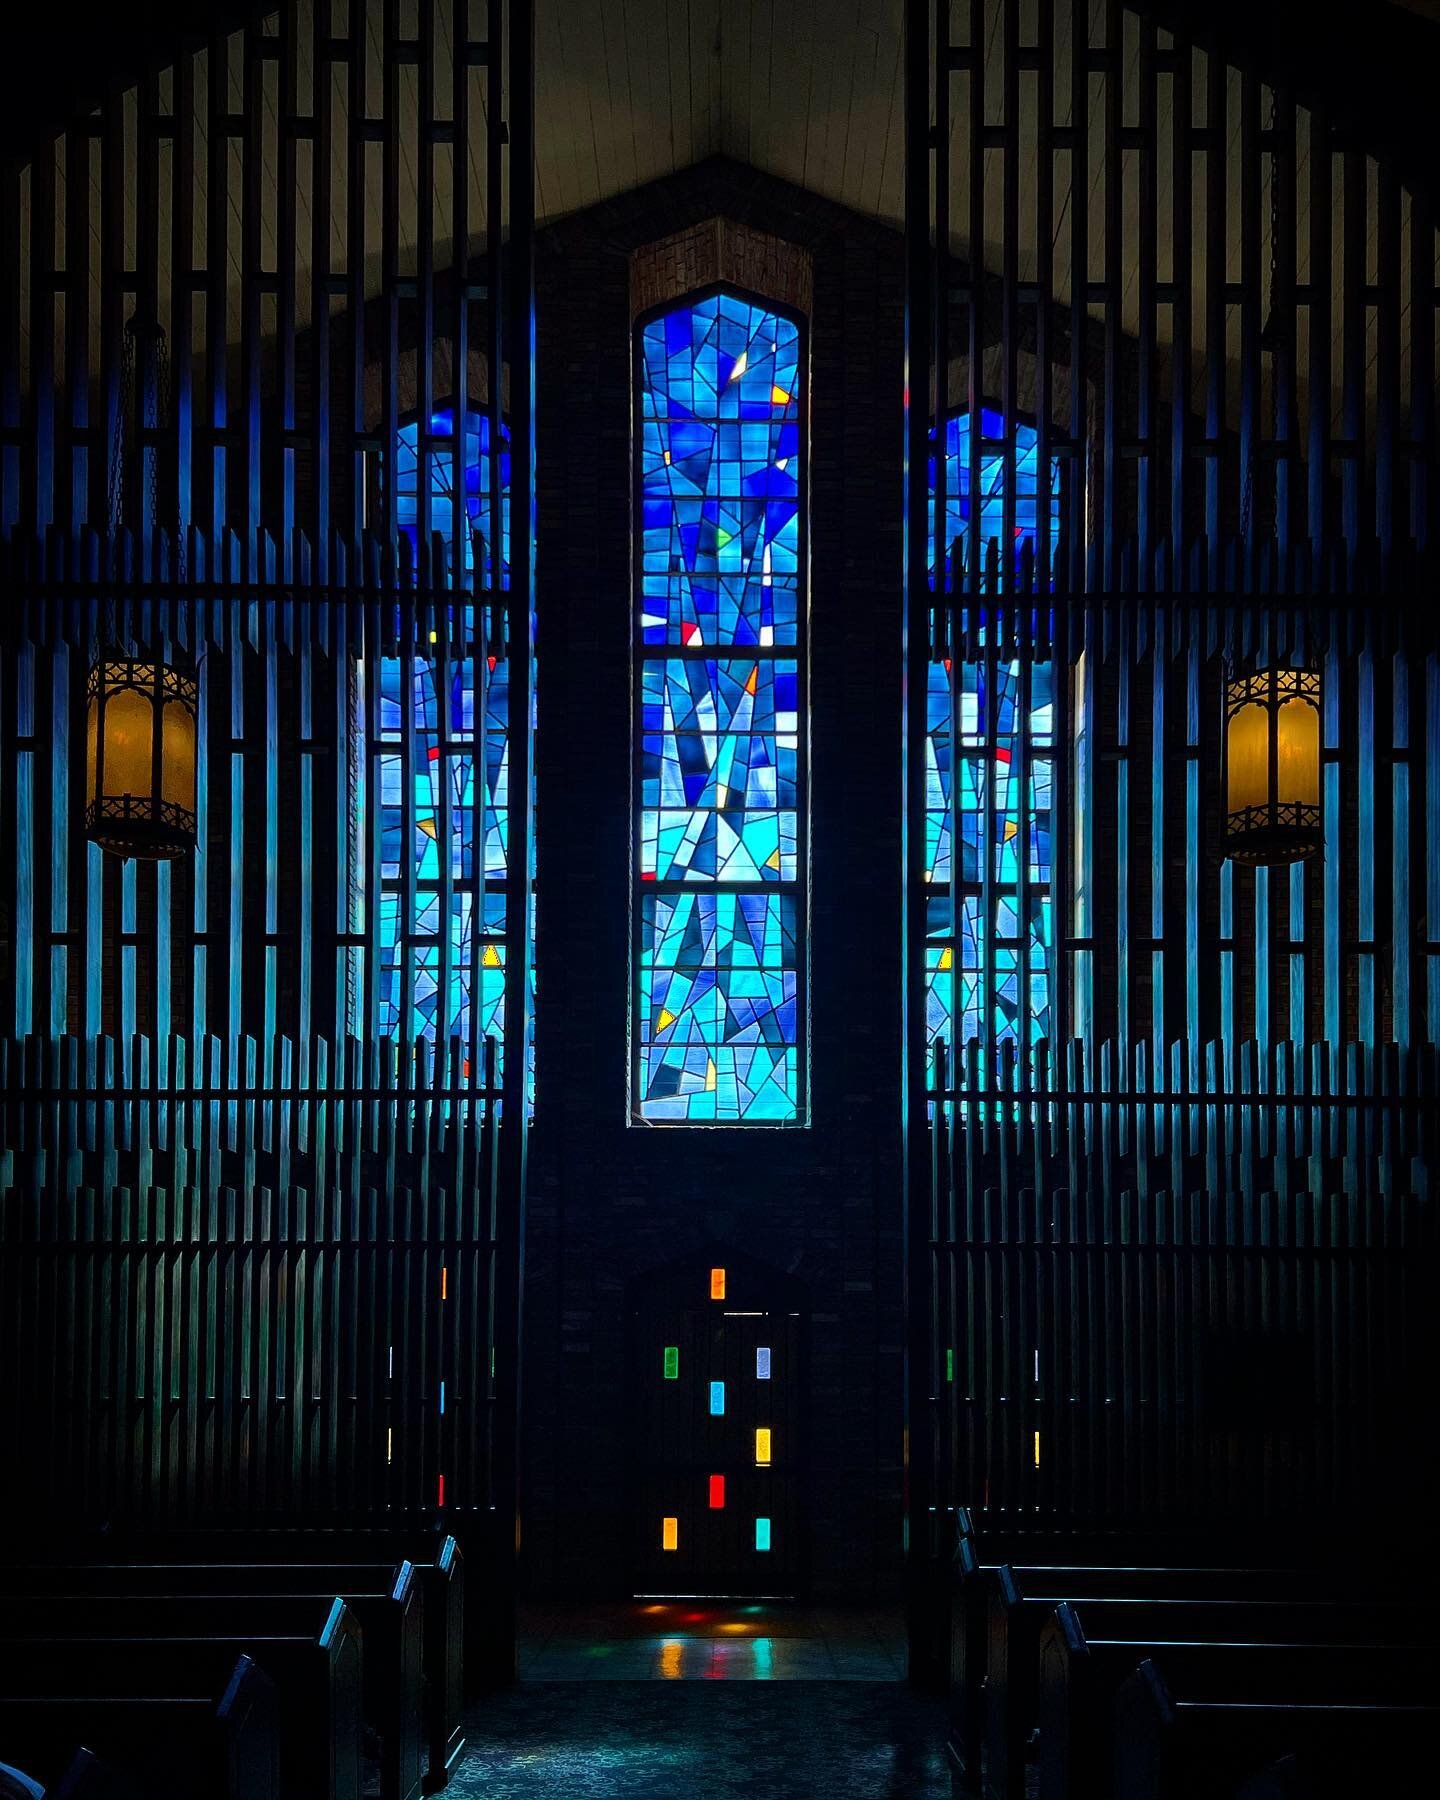 Chapel of Memories at Mississippi State University. Built 1965, designed by architect Charles Gardner.